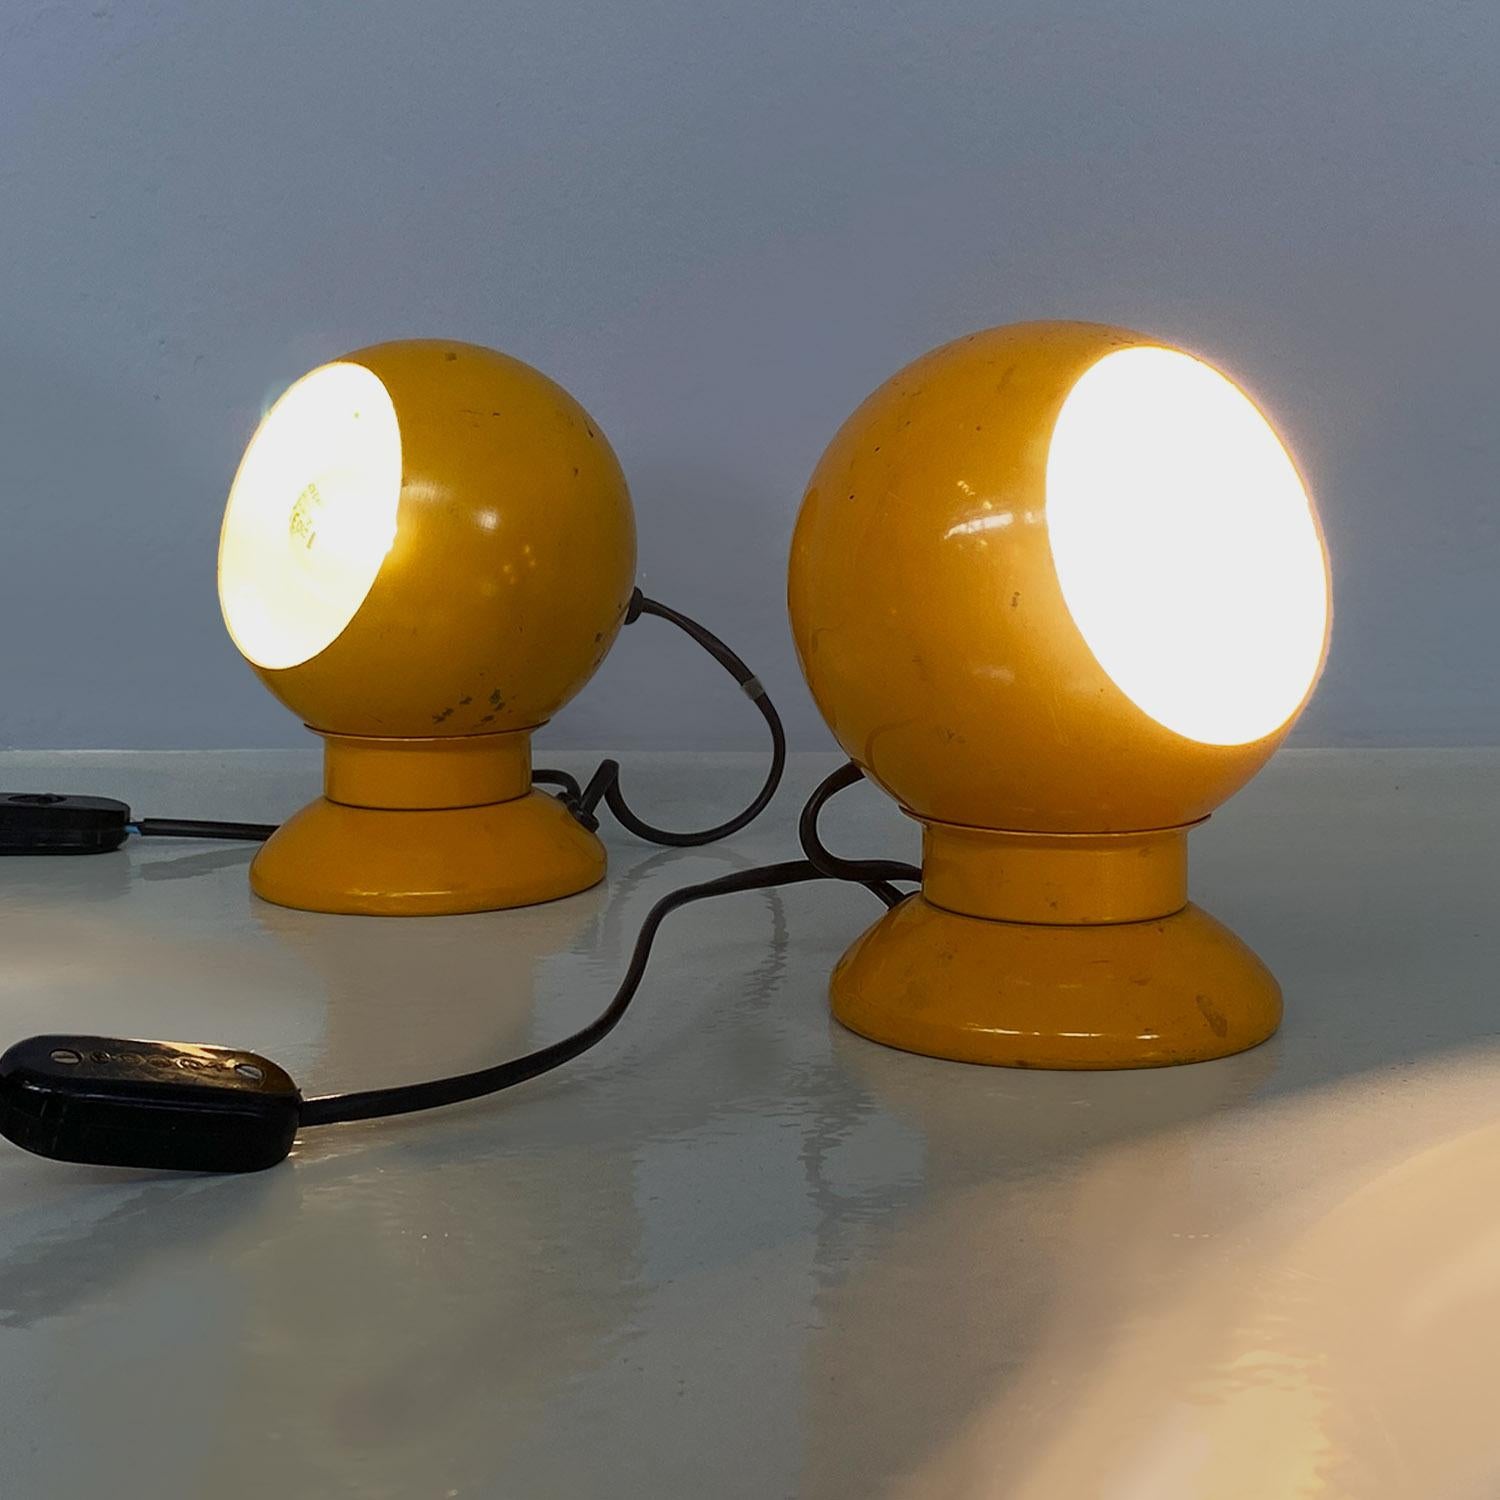 Italian modern yellow metal table lamps or applique by Goffredo Reggiani for Reggiani Illuminazione, 1970s.
Pair of table lamps, with support and with the possibility of hanging on the wall as a wall lamp, in yellow enamelled metal.
They contain a